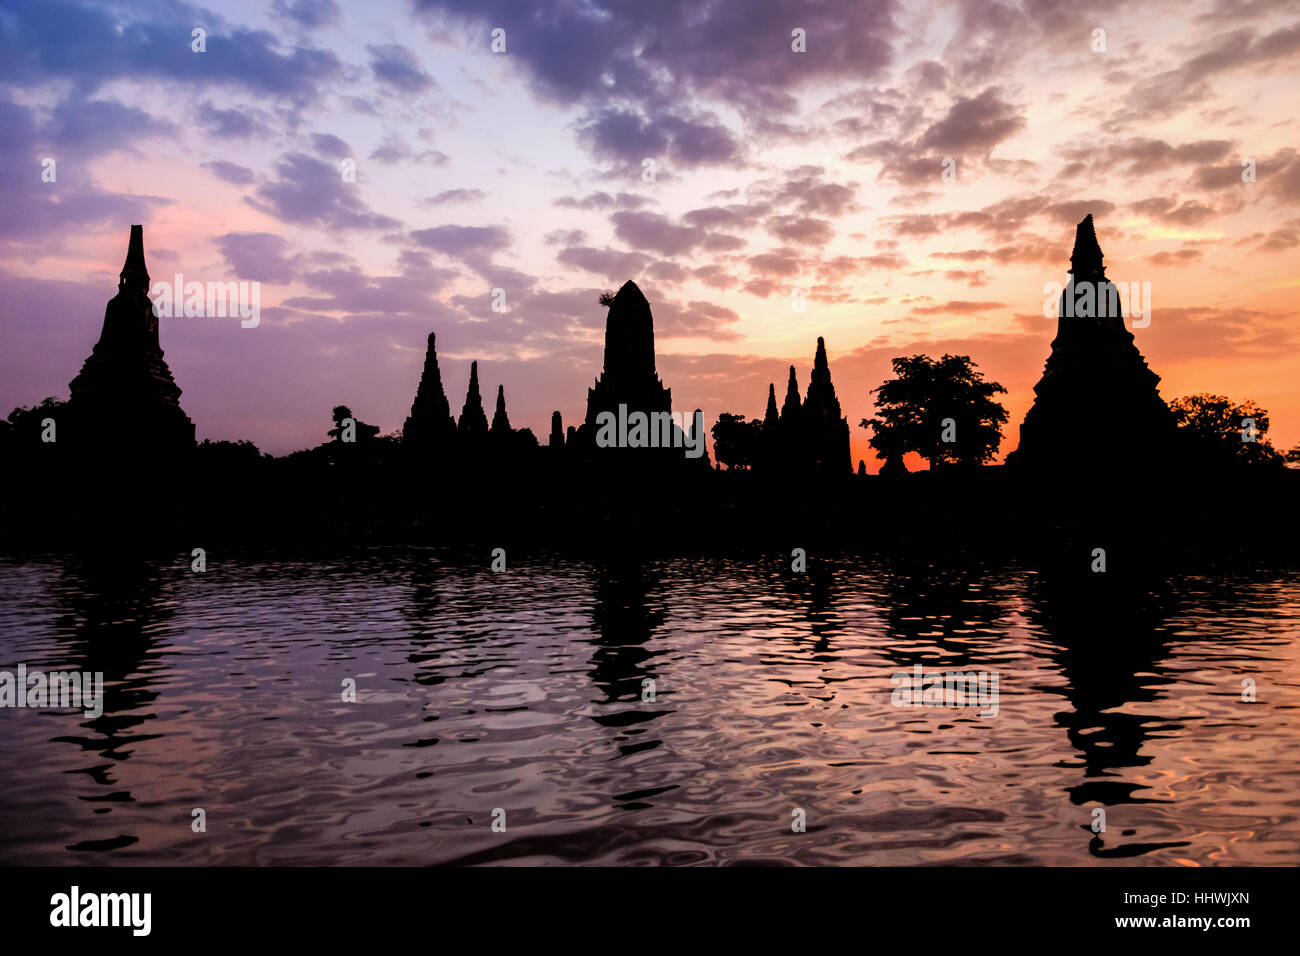 Landscape silhouette of Wat Chaiwatthanaram during sunset next to the Chao Phraya River is ancient temple famous religious attraction of Ayutthaya Stock Photo